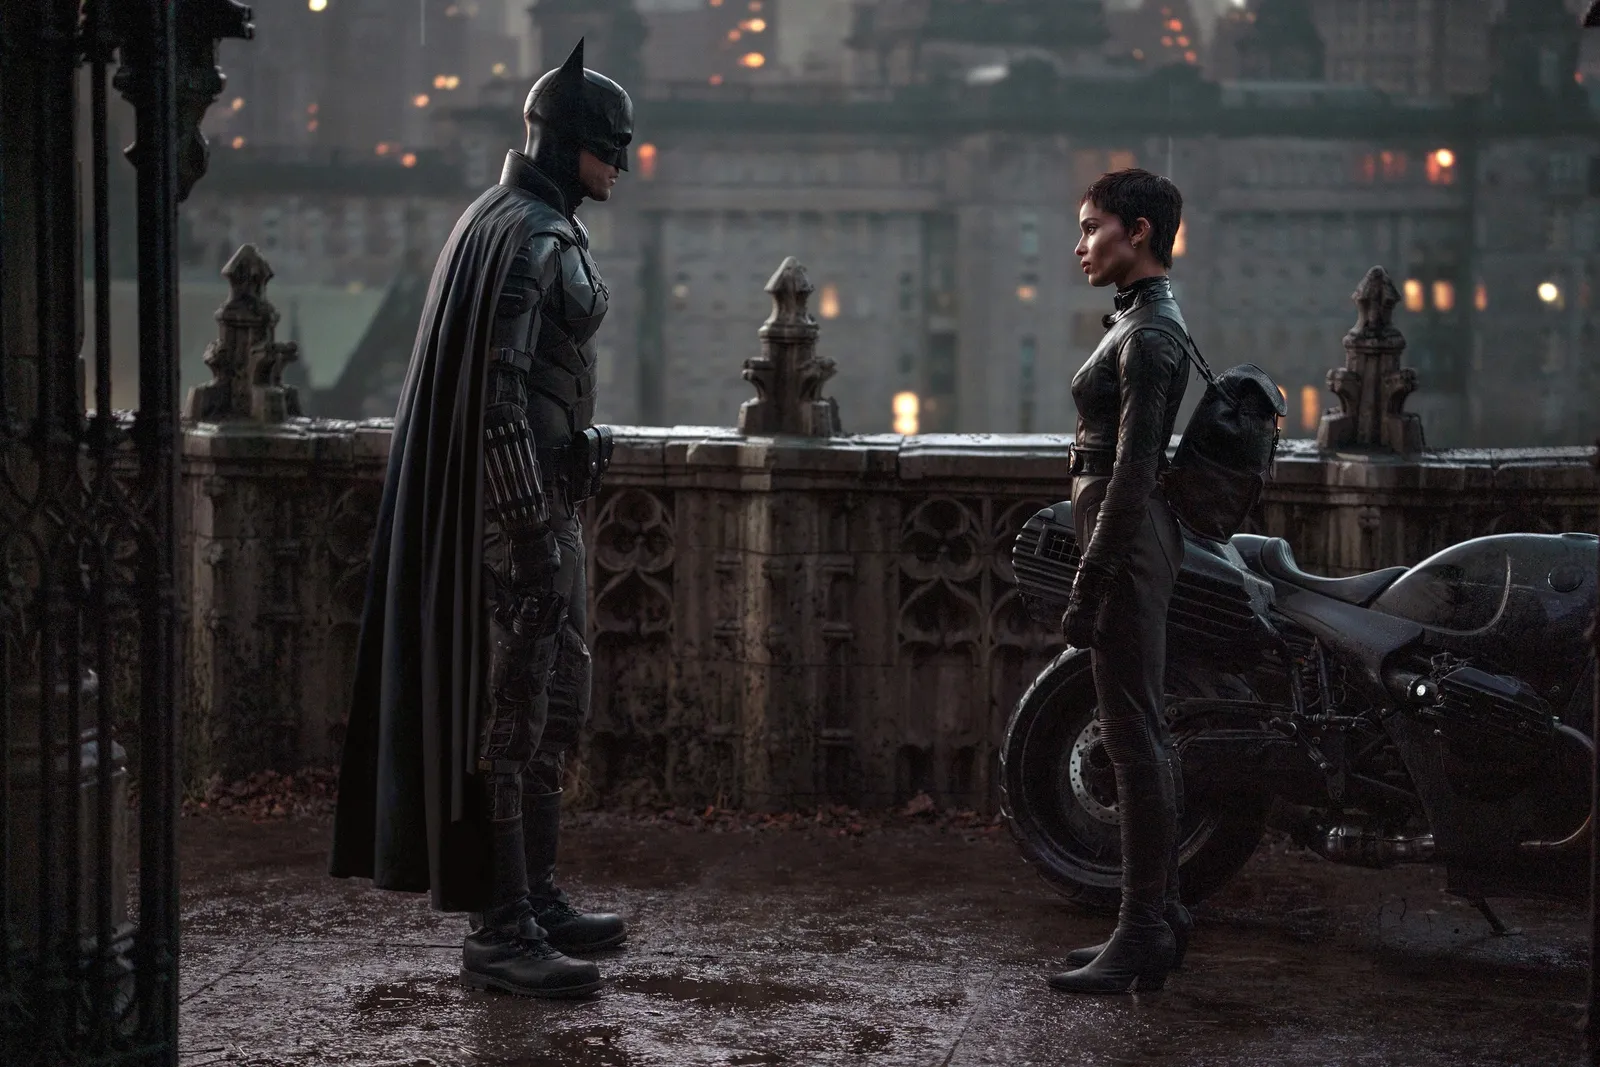 Catwoman and Batman facing eachother at a rooftop talking. There is a motorcycle behind Catwoman.